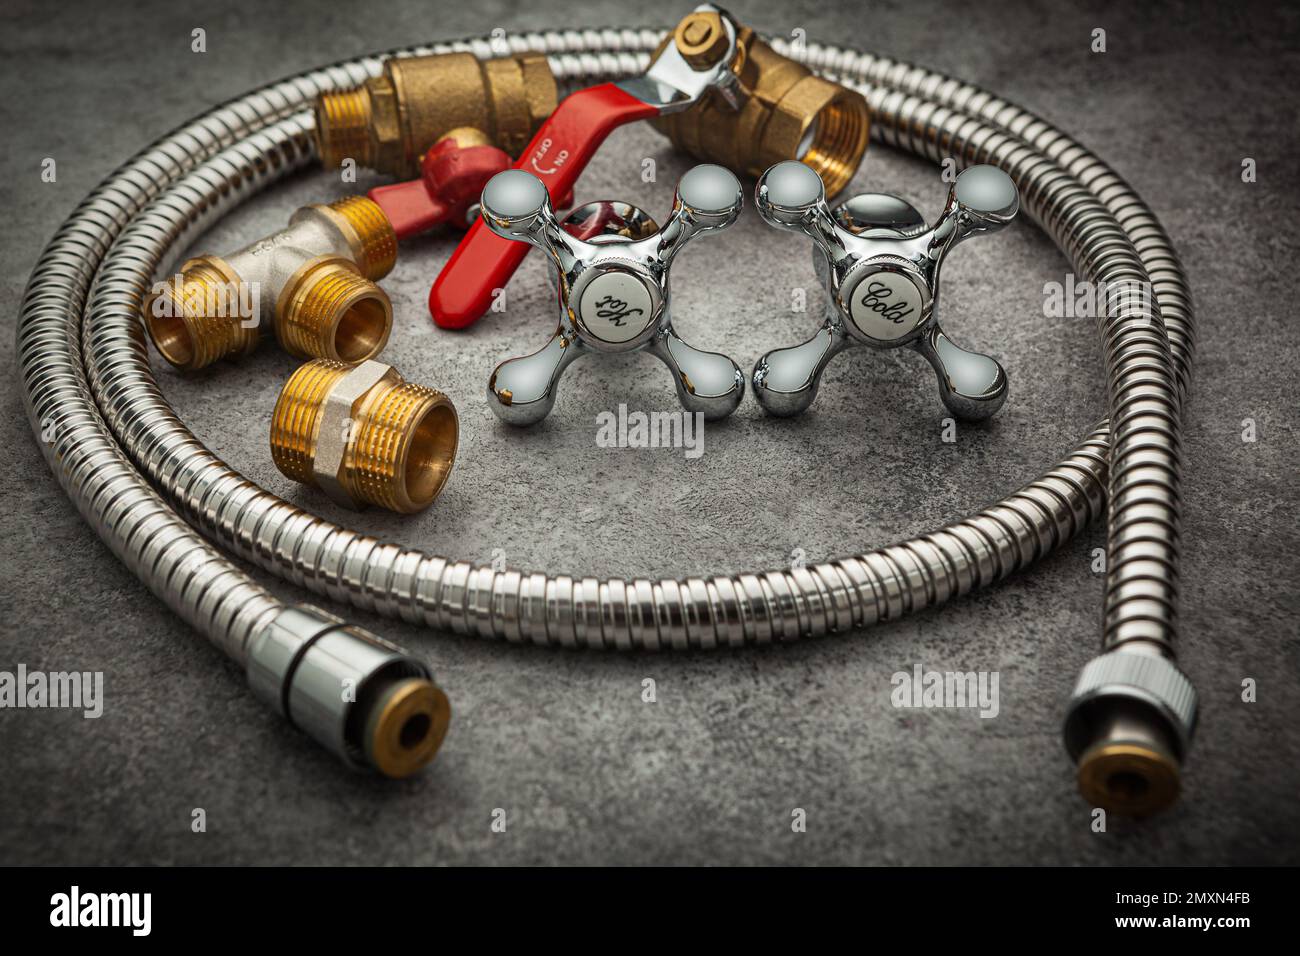 Rolled Bathroom Chrome Shower Flexible Hose Pipe And Brass Pipe Fixtures Fittings Stock Photo